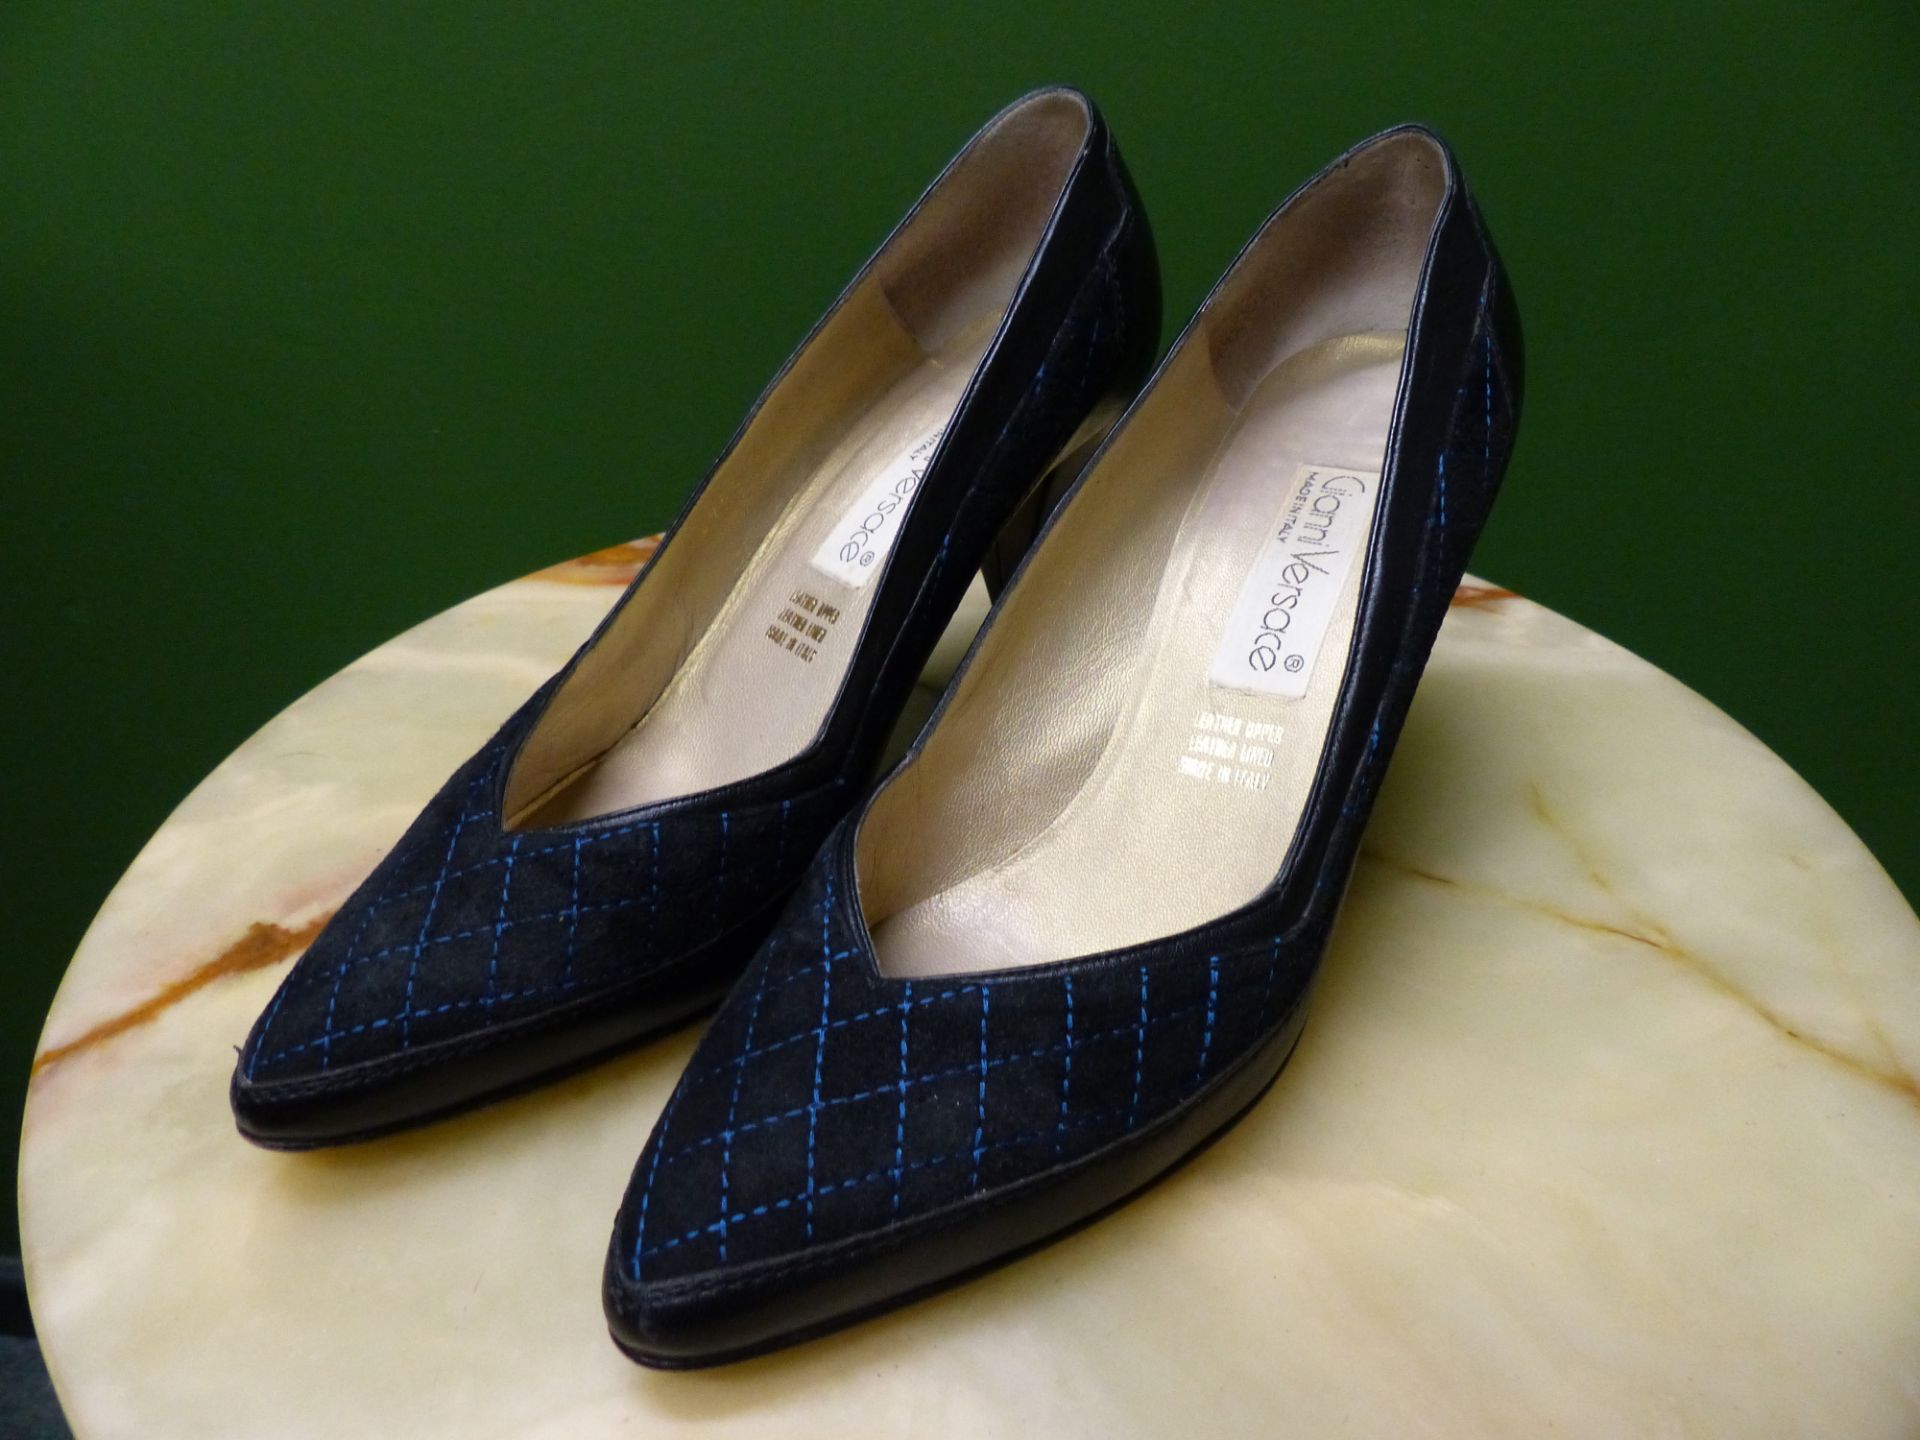 SHOES. GIANNI VERSACE ITALIAN BLACK WITH NAVY STITCH HEELS. EURO SIZE 39. HEEL HEIGHT 8cm.